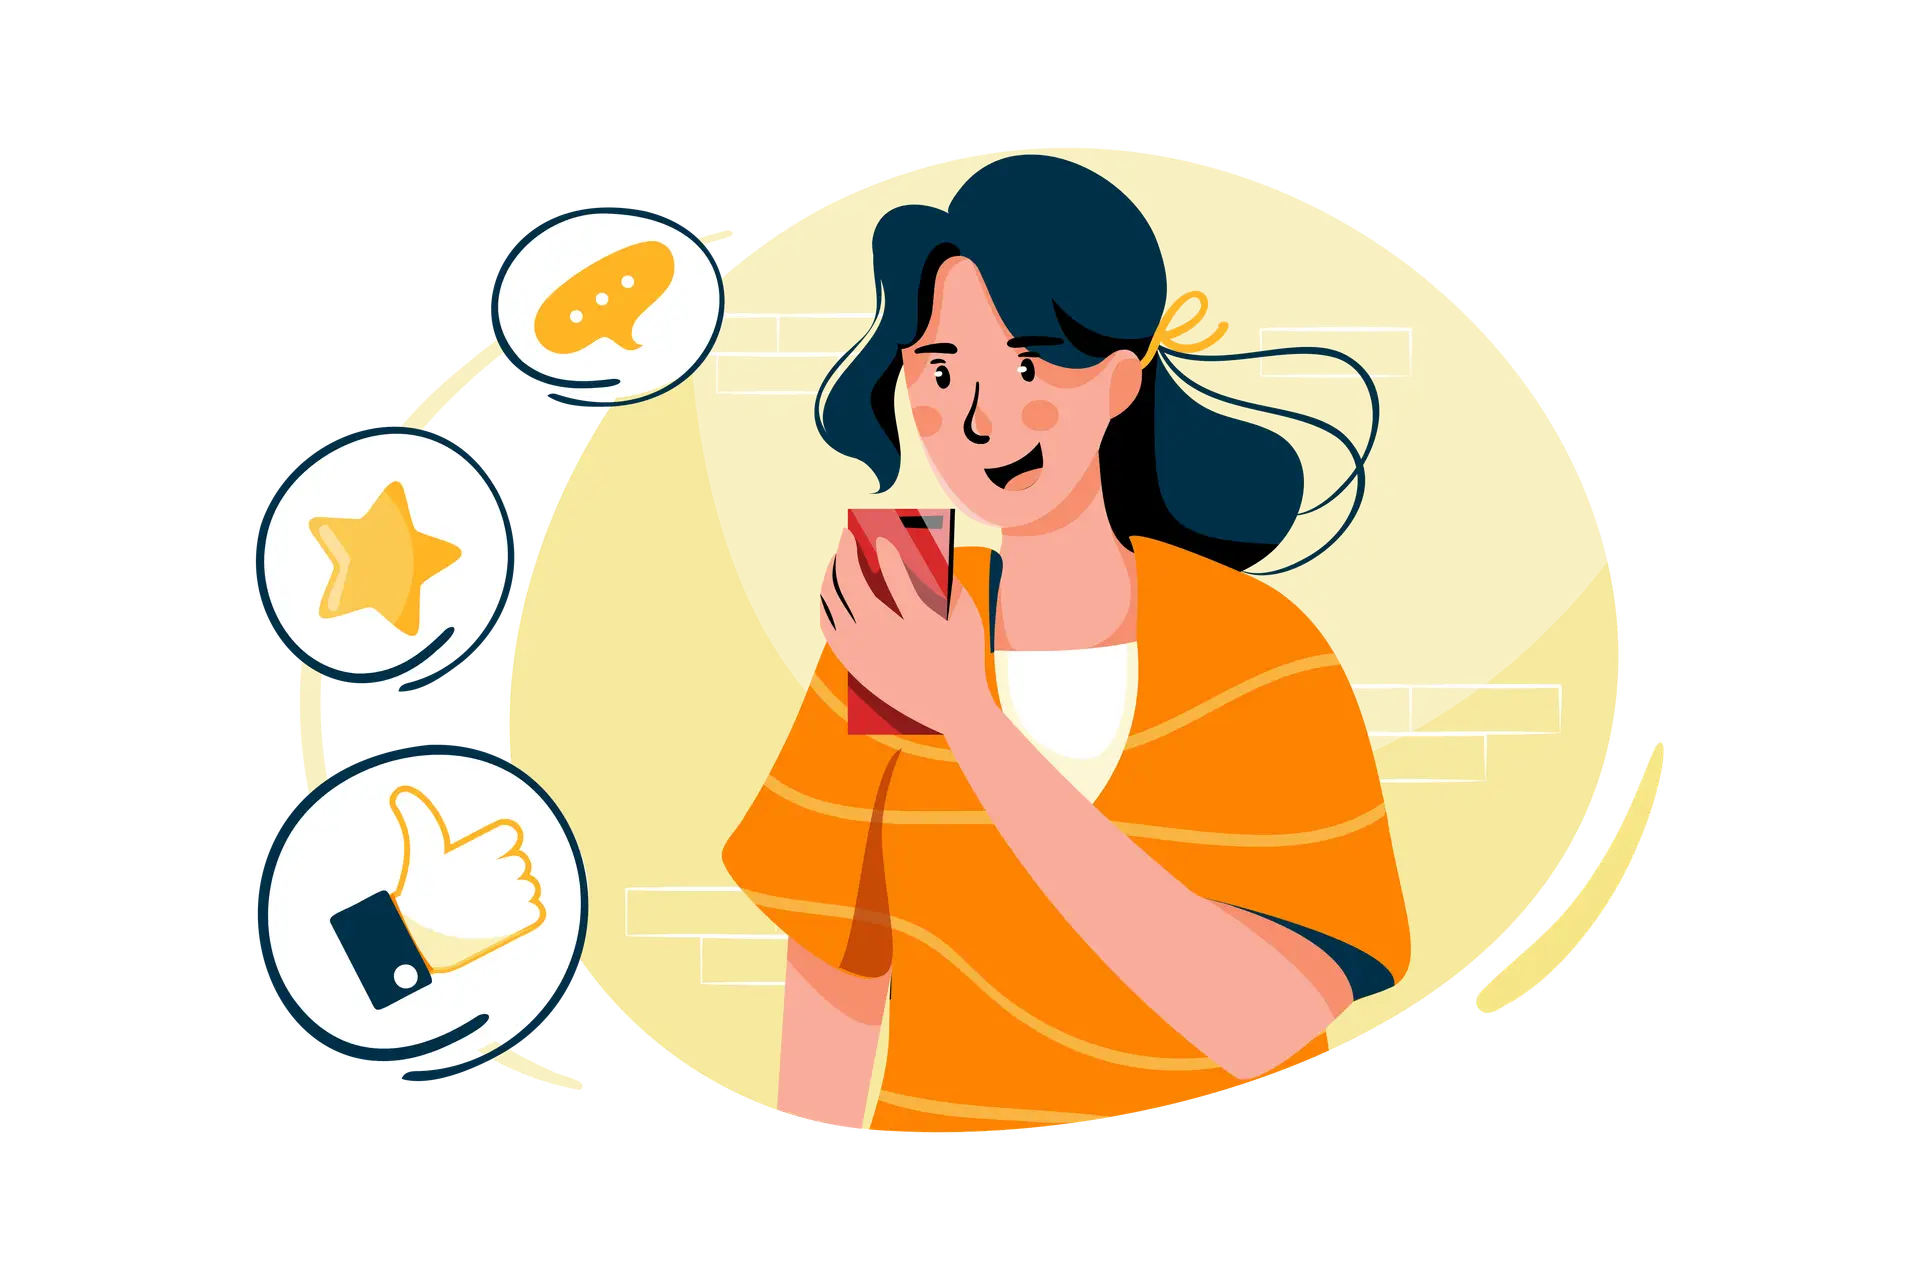 A young woman interacting with her smartphone at home, surrounded by icons symbolizing communication, approval, and favorability, such as a speech bubble, a star, and a thumbs-up.